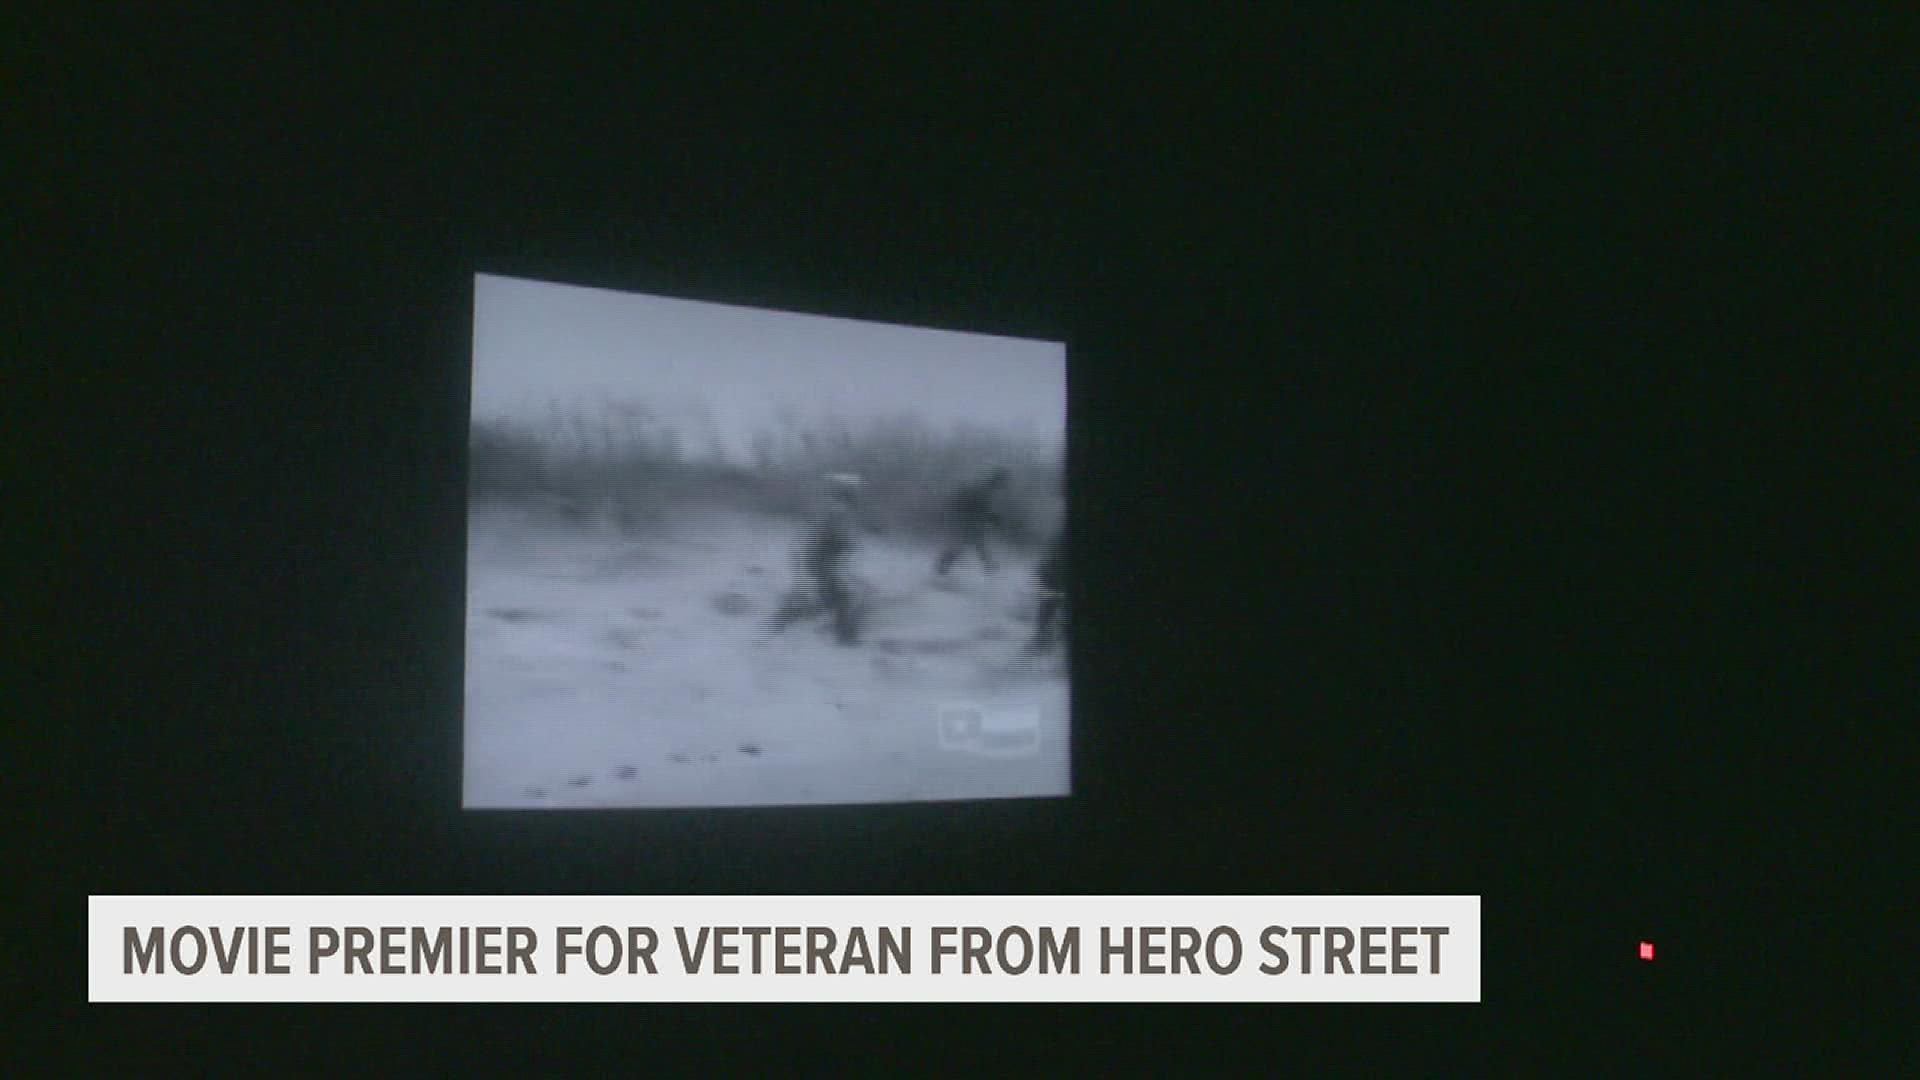 The filmmakers' focus was to shed light on ordinary men in combat, including Pvt. Joseph Sandoval from Hero Street in Silvis.